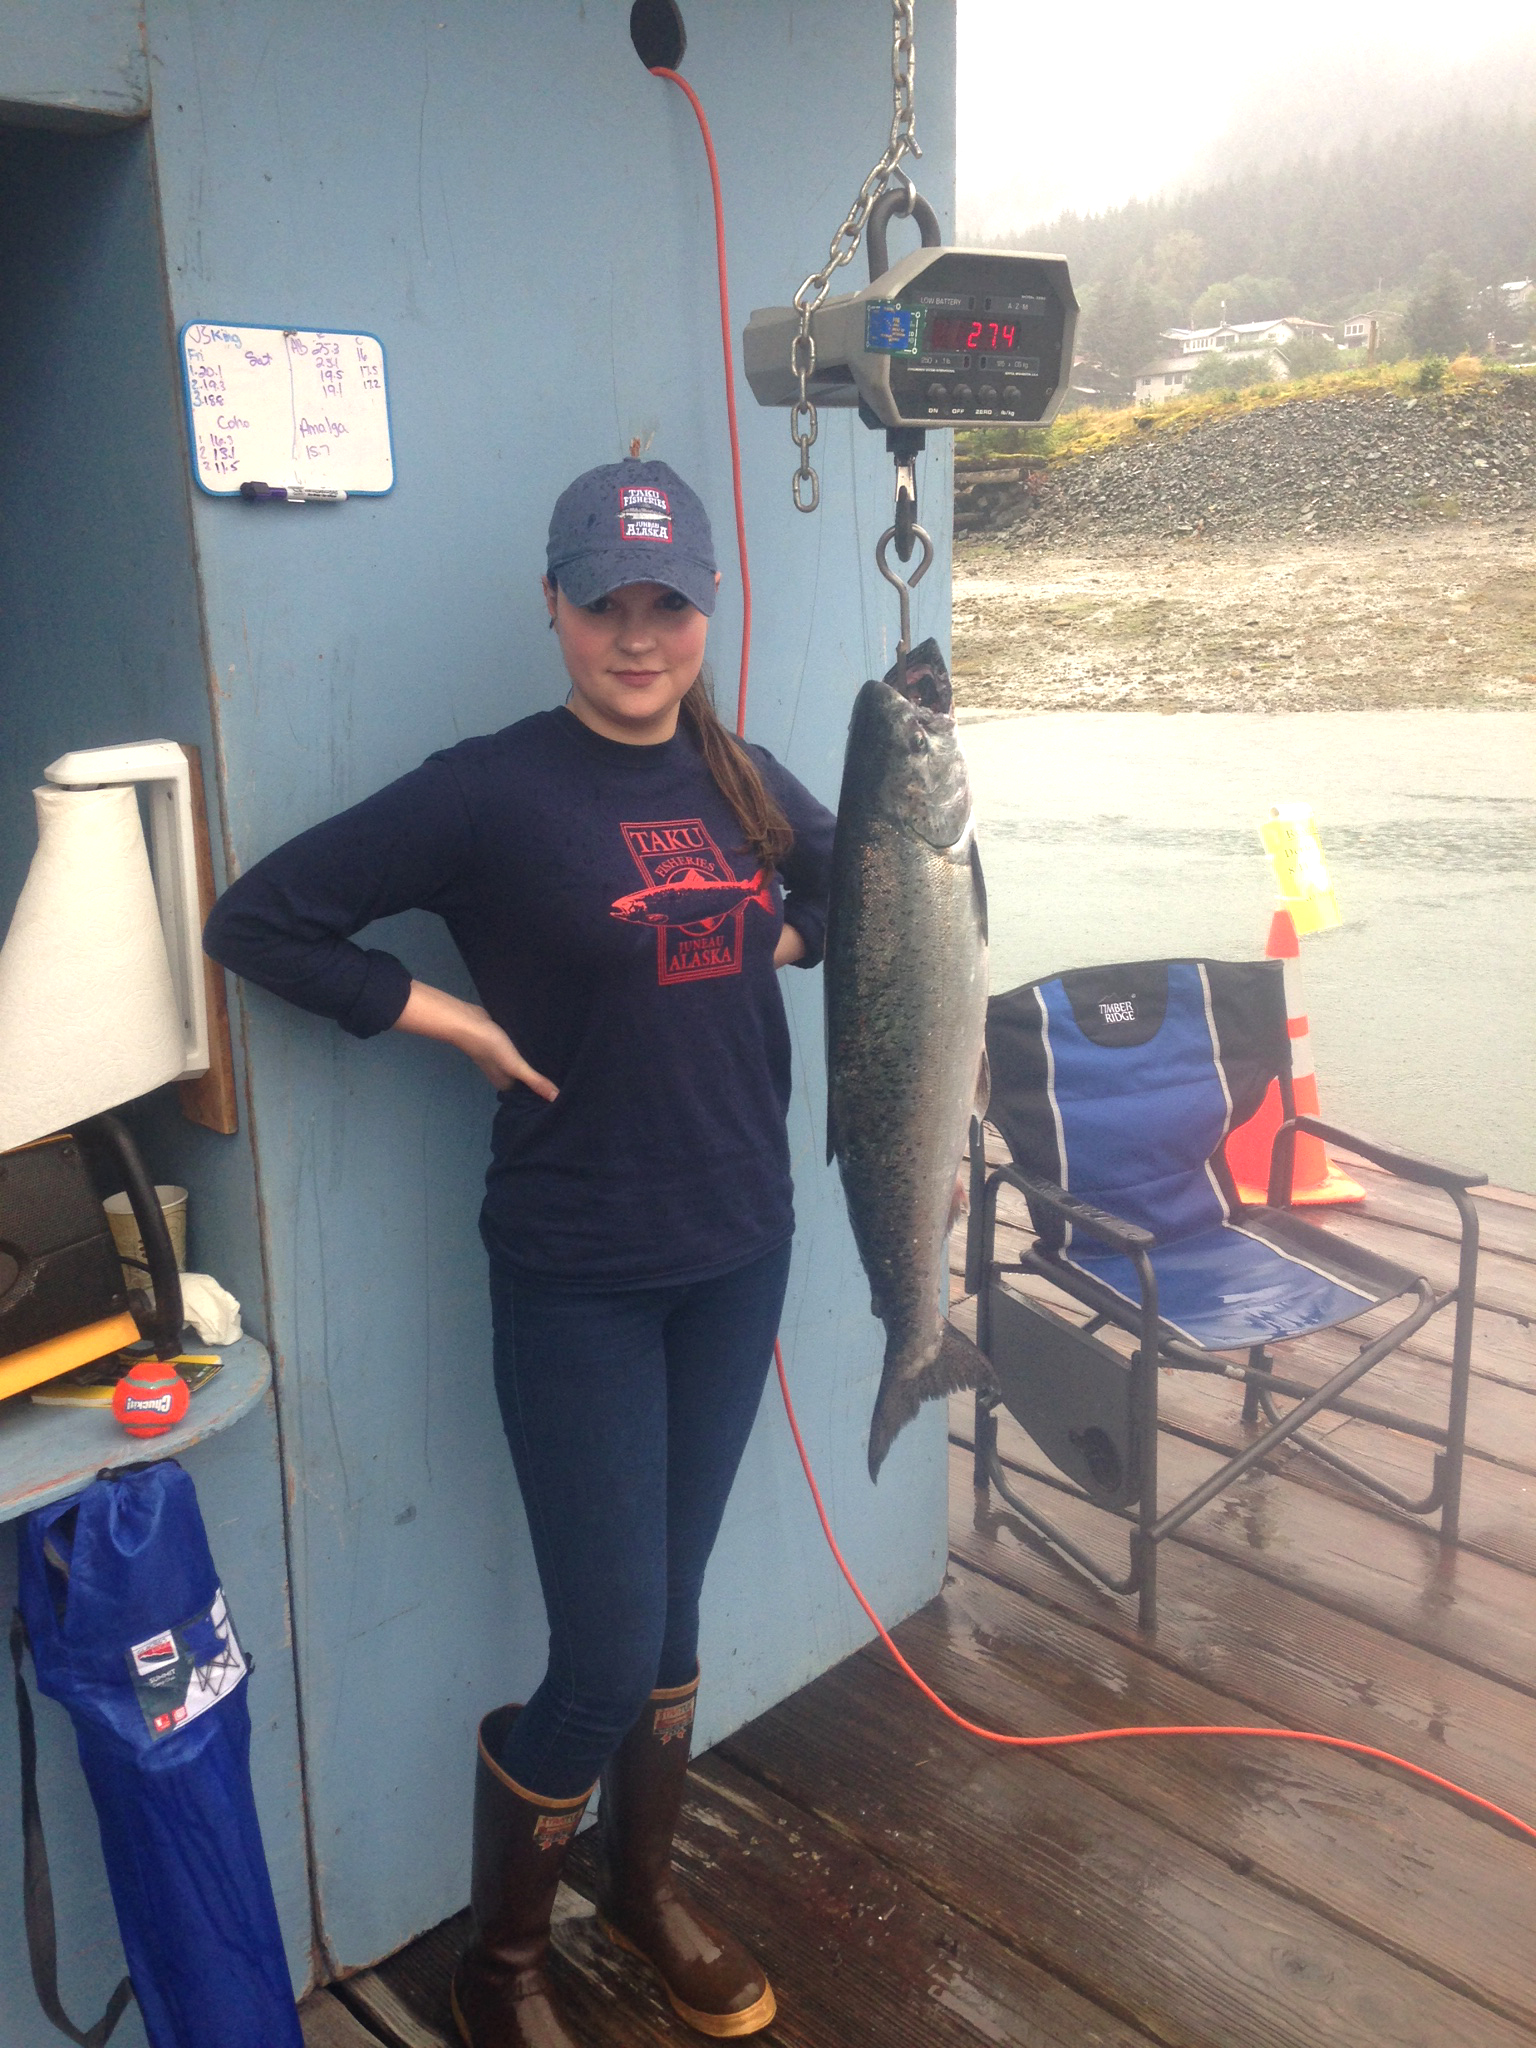 Katherine Dimond, 23, stands beside her winning 27.4 pound catch on Friday at the Douglas weighing station. Dimond's catch was the largest during the three-day 2016 Golden North Salmon Derby.